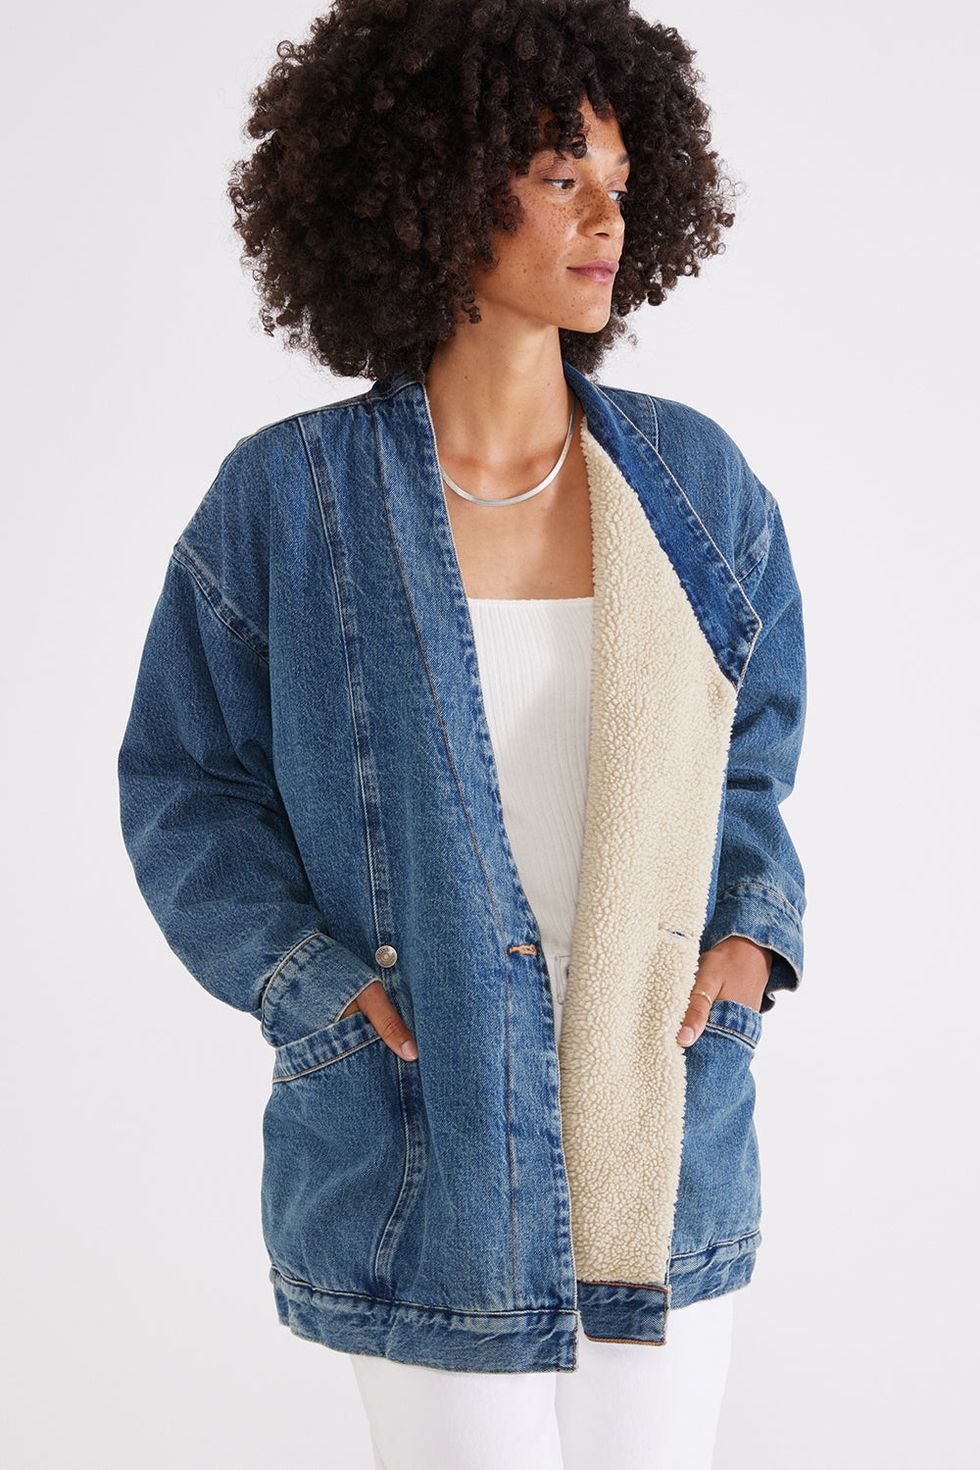 980px x 1470px - Best Jean Jackets for Women - Denim Jackets to Wear This Fall